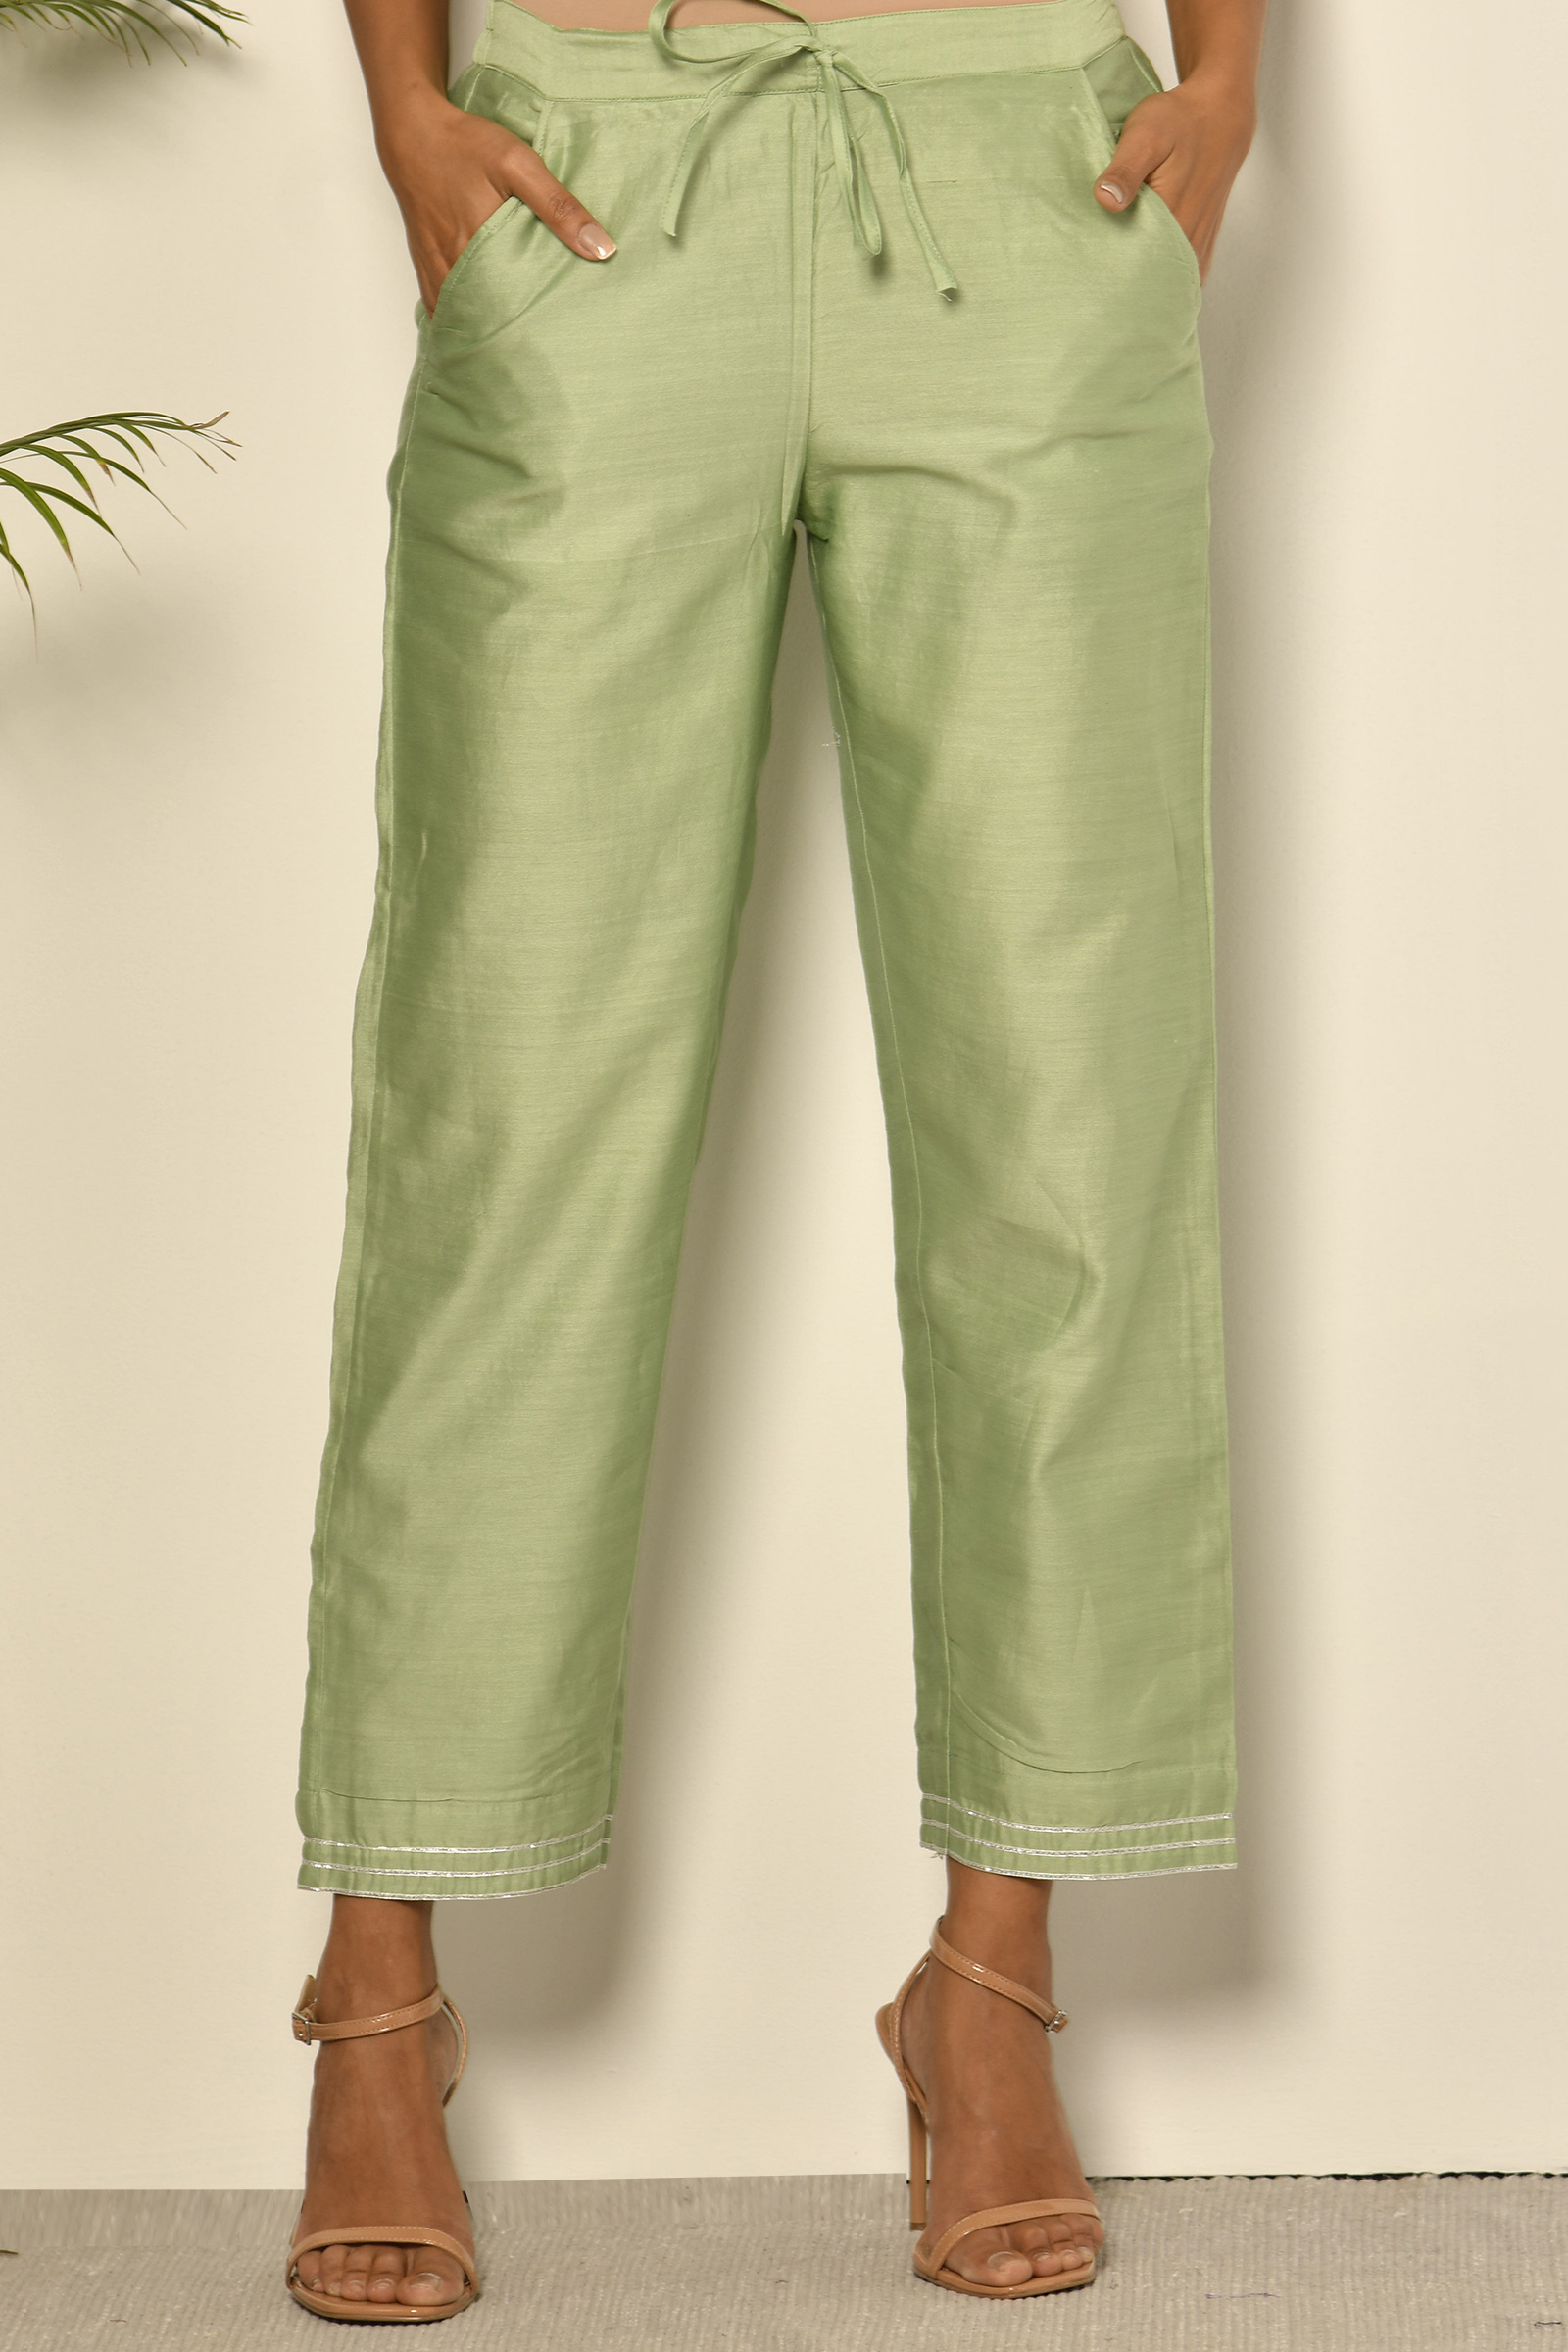 Buy Womens Parrot Green Straight Fit Trousers for Women Online at Bewakoof